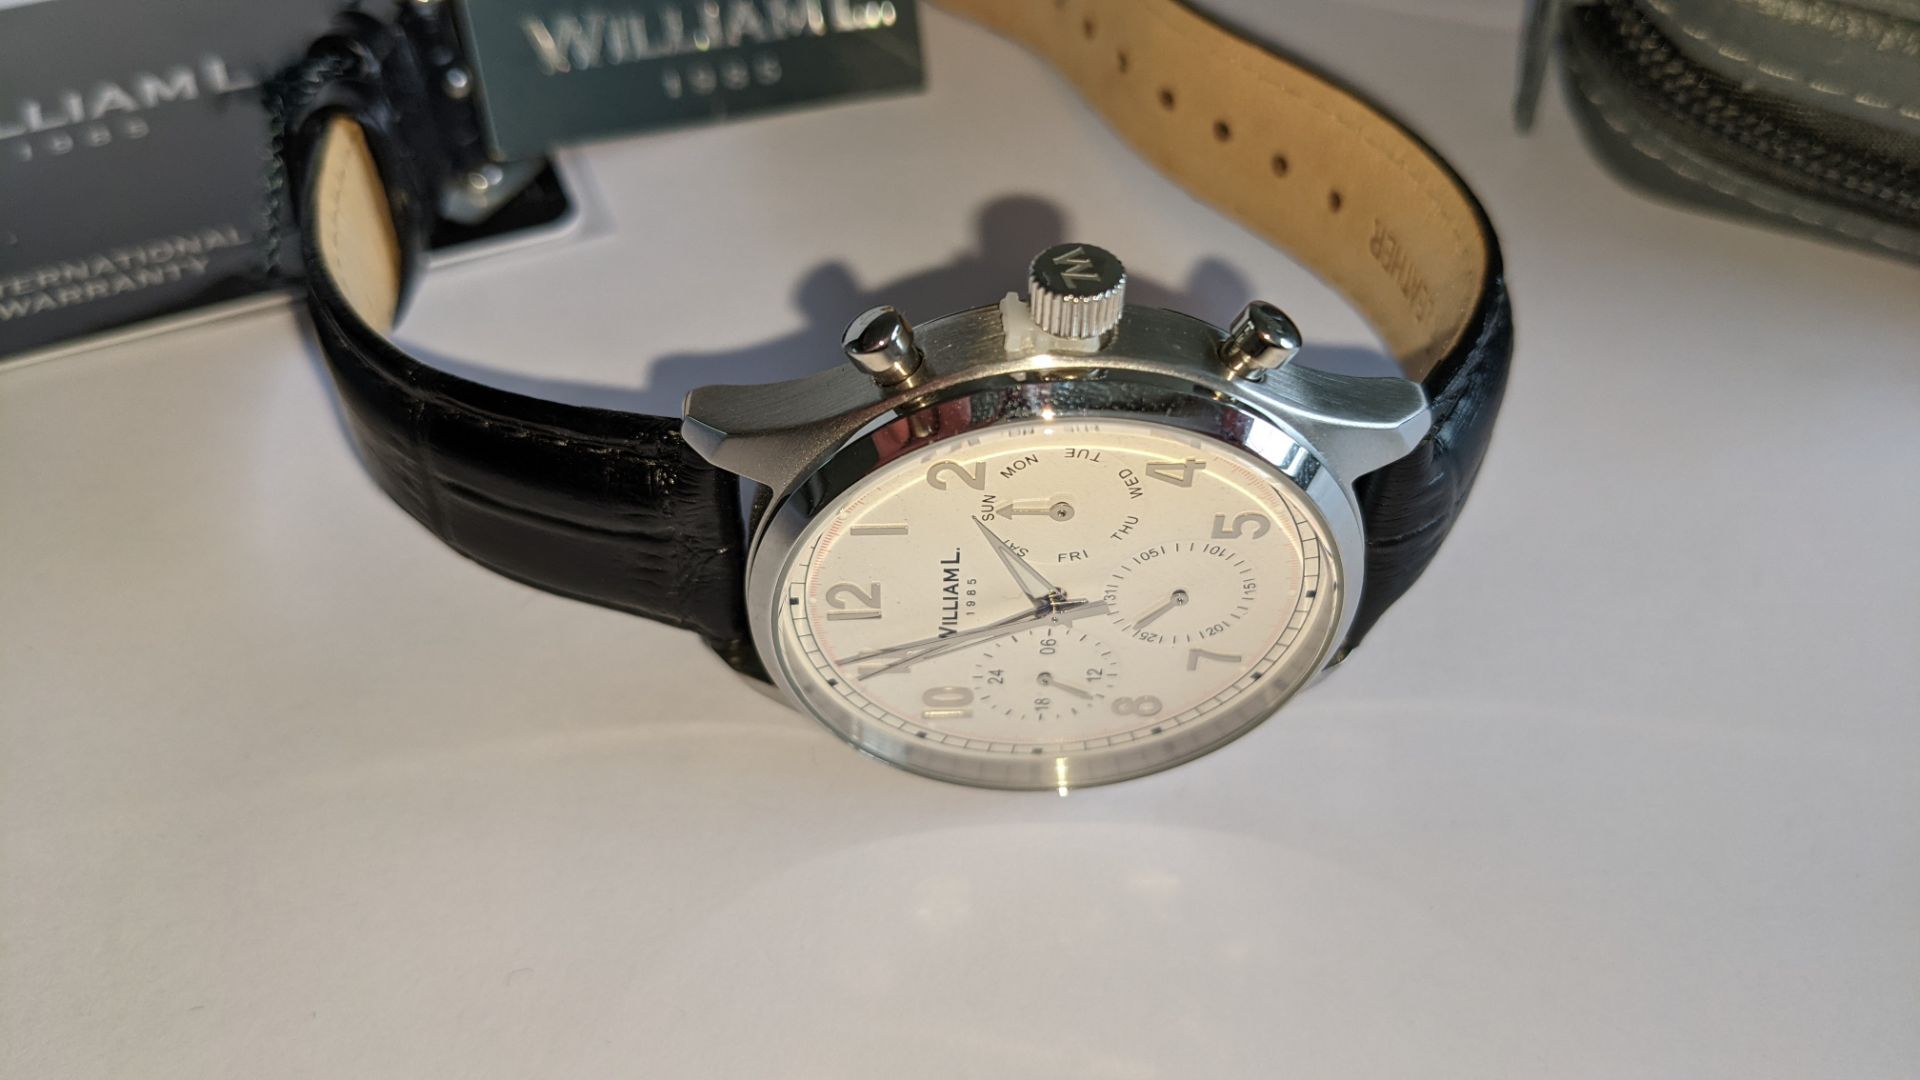 William L 1985 stainless steel watch, 5 ATM water resistant, leather strap, RRP £129. Includes box - Image 7 of 17